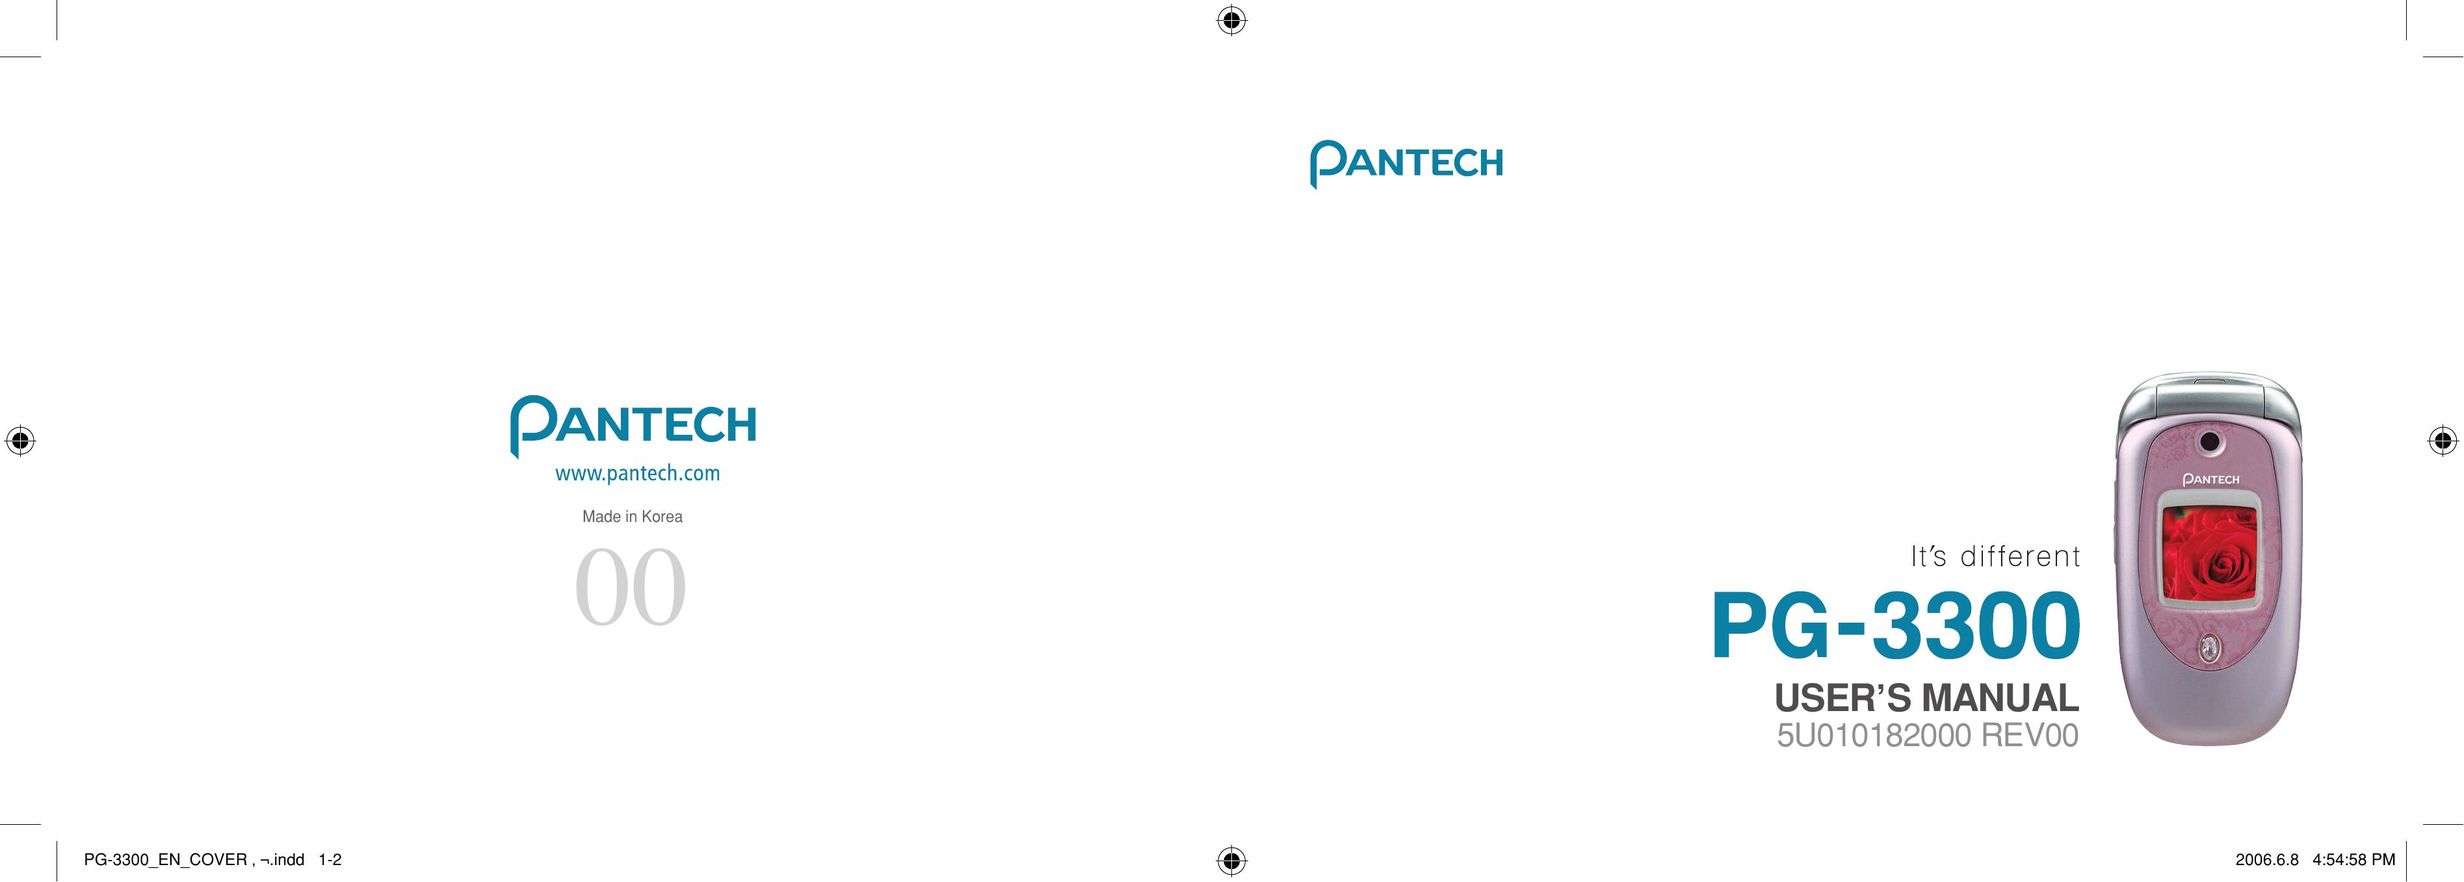 Pantech PG-3300 Cell Phone User Manual (Page 1)